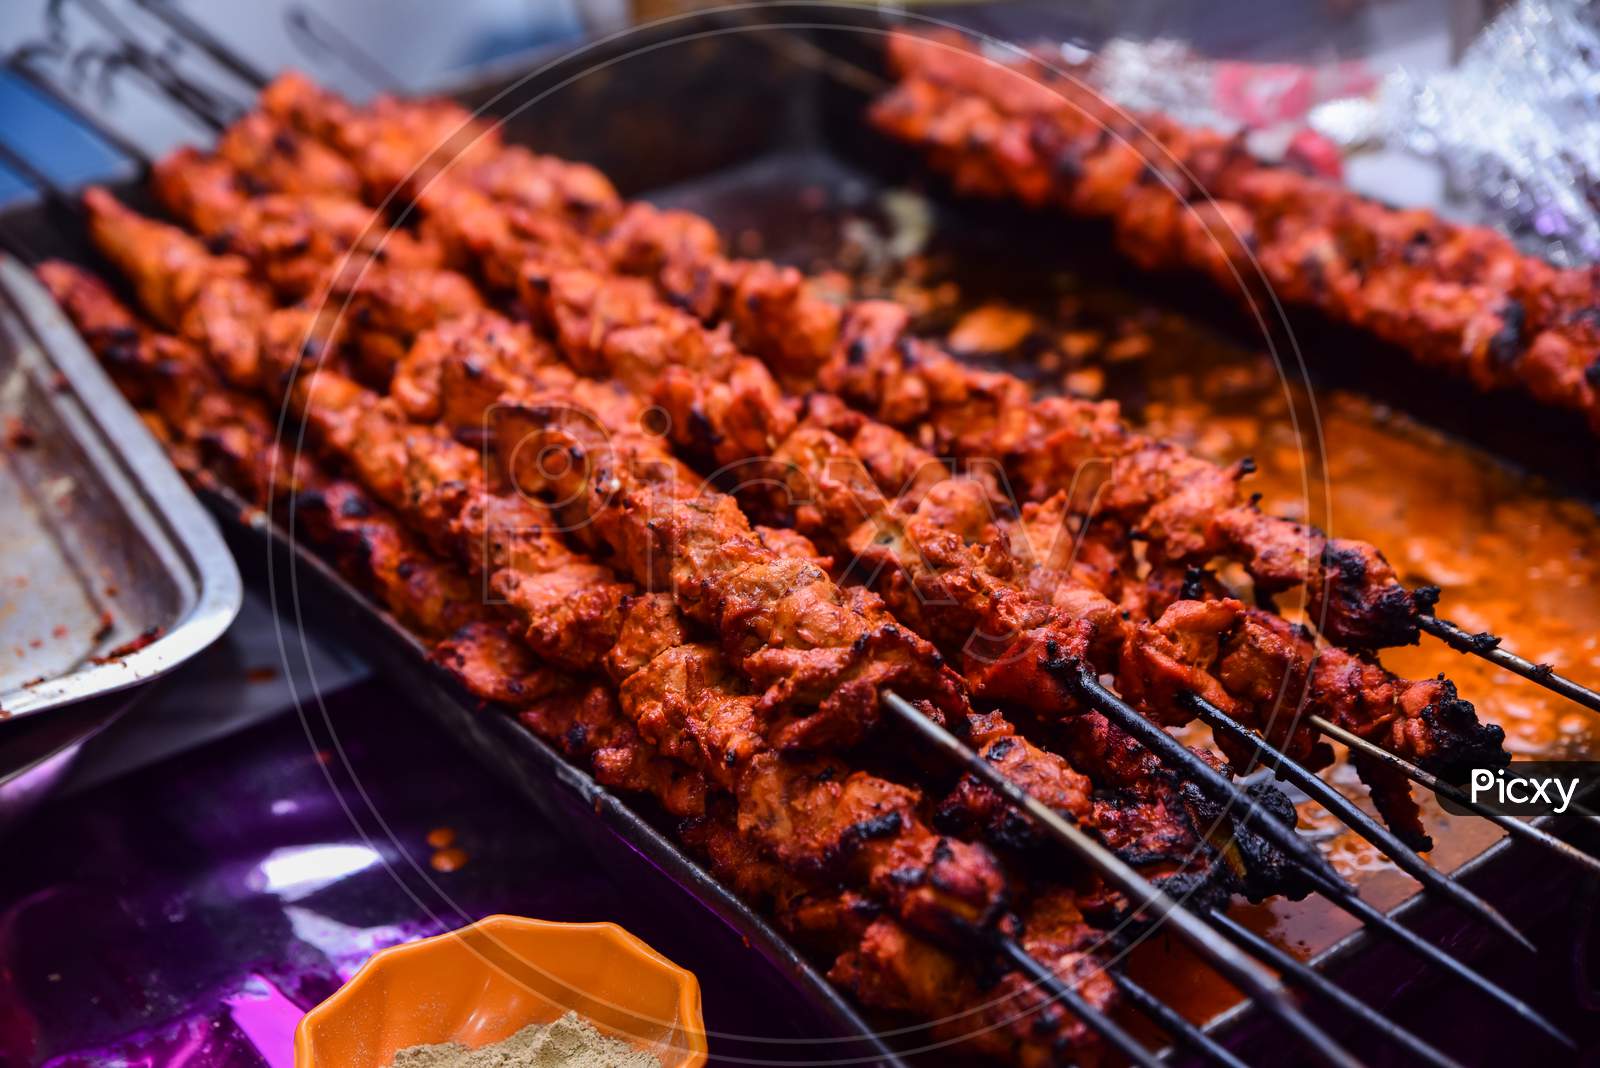 Barbecue Chicken Kebabs On The Hot Grill Close-up. Flames of Fire In The Background